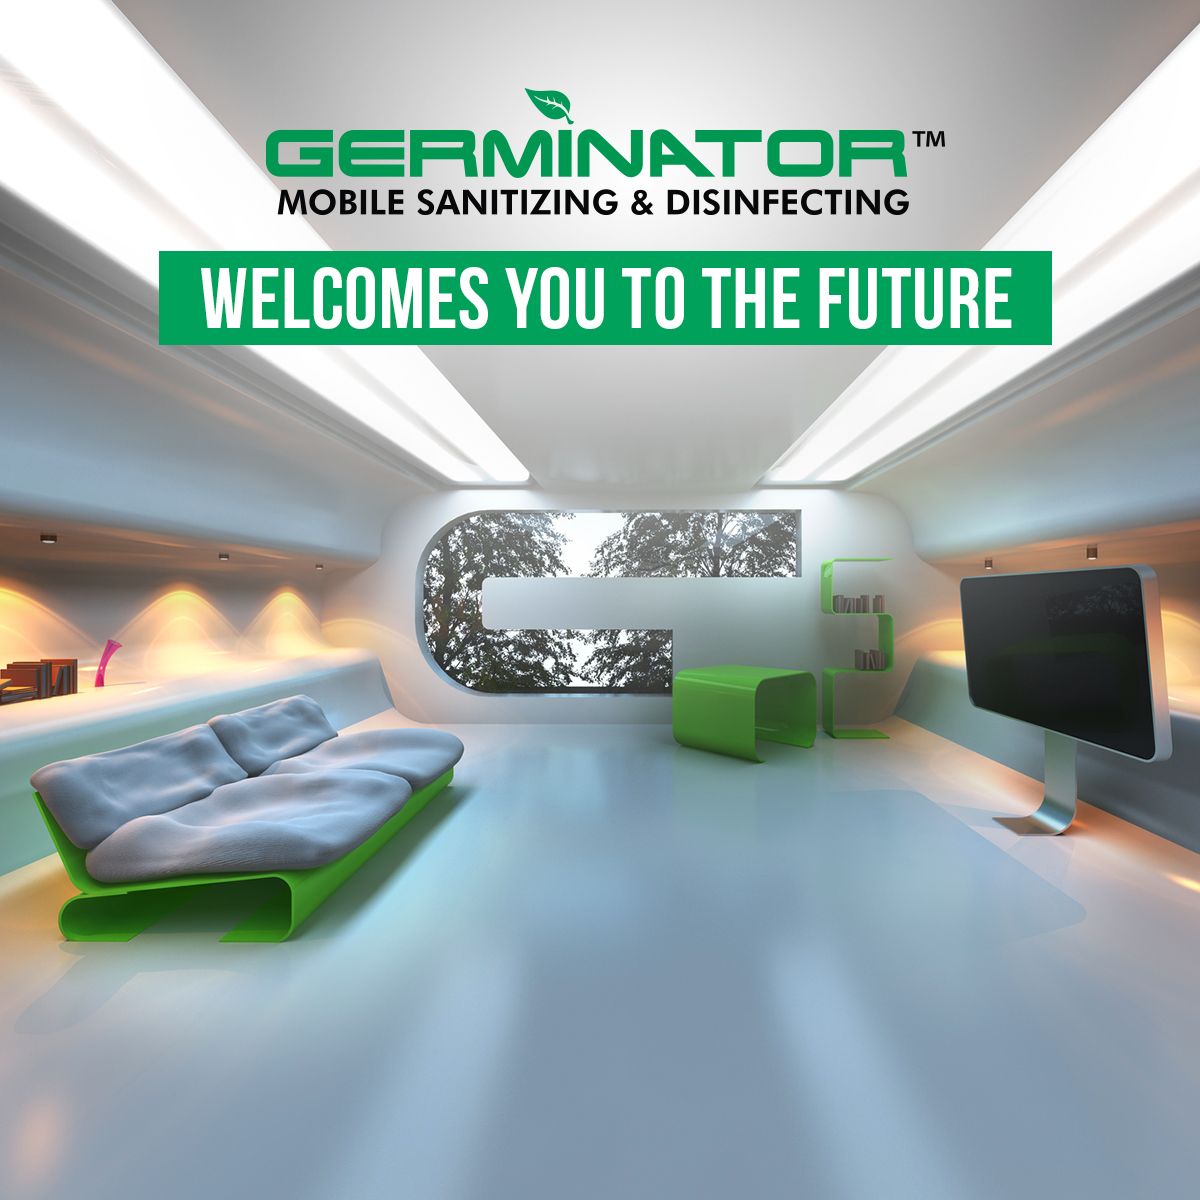 Germinator (logo) welcomes you to the future